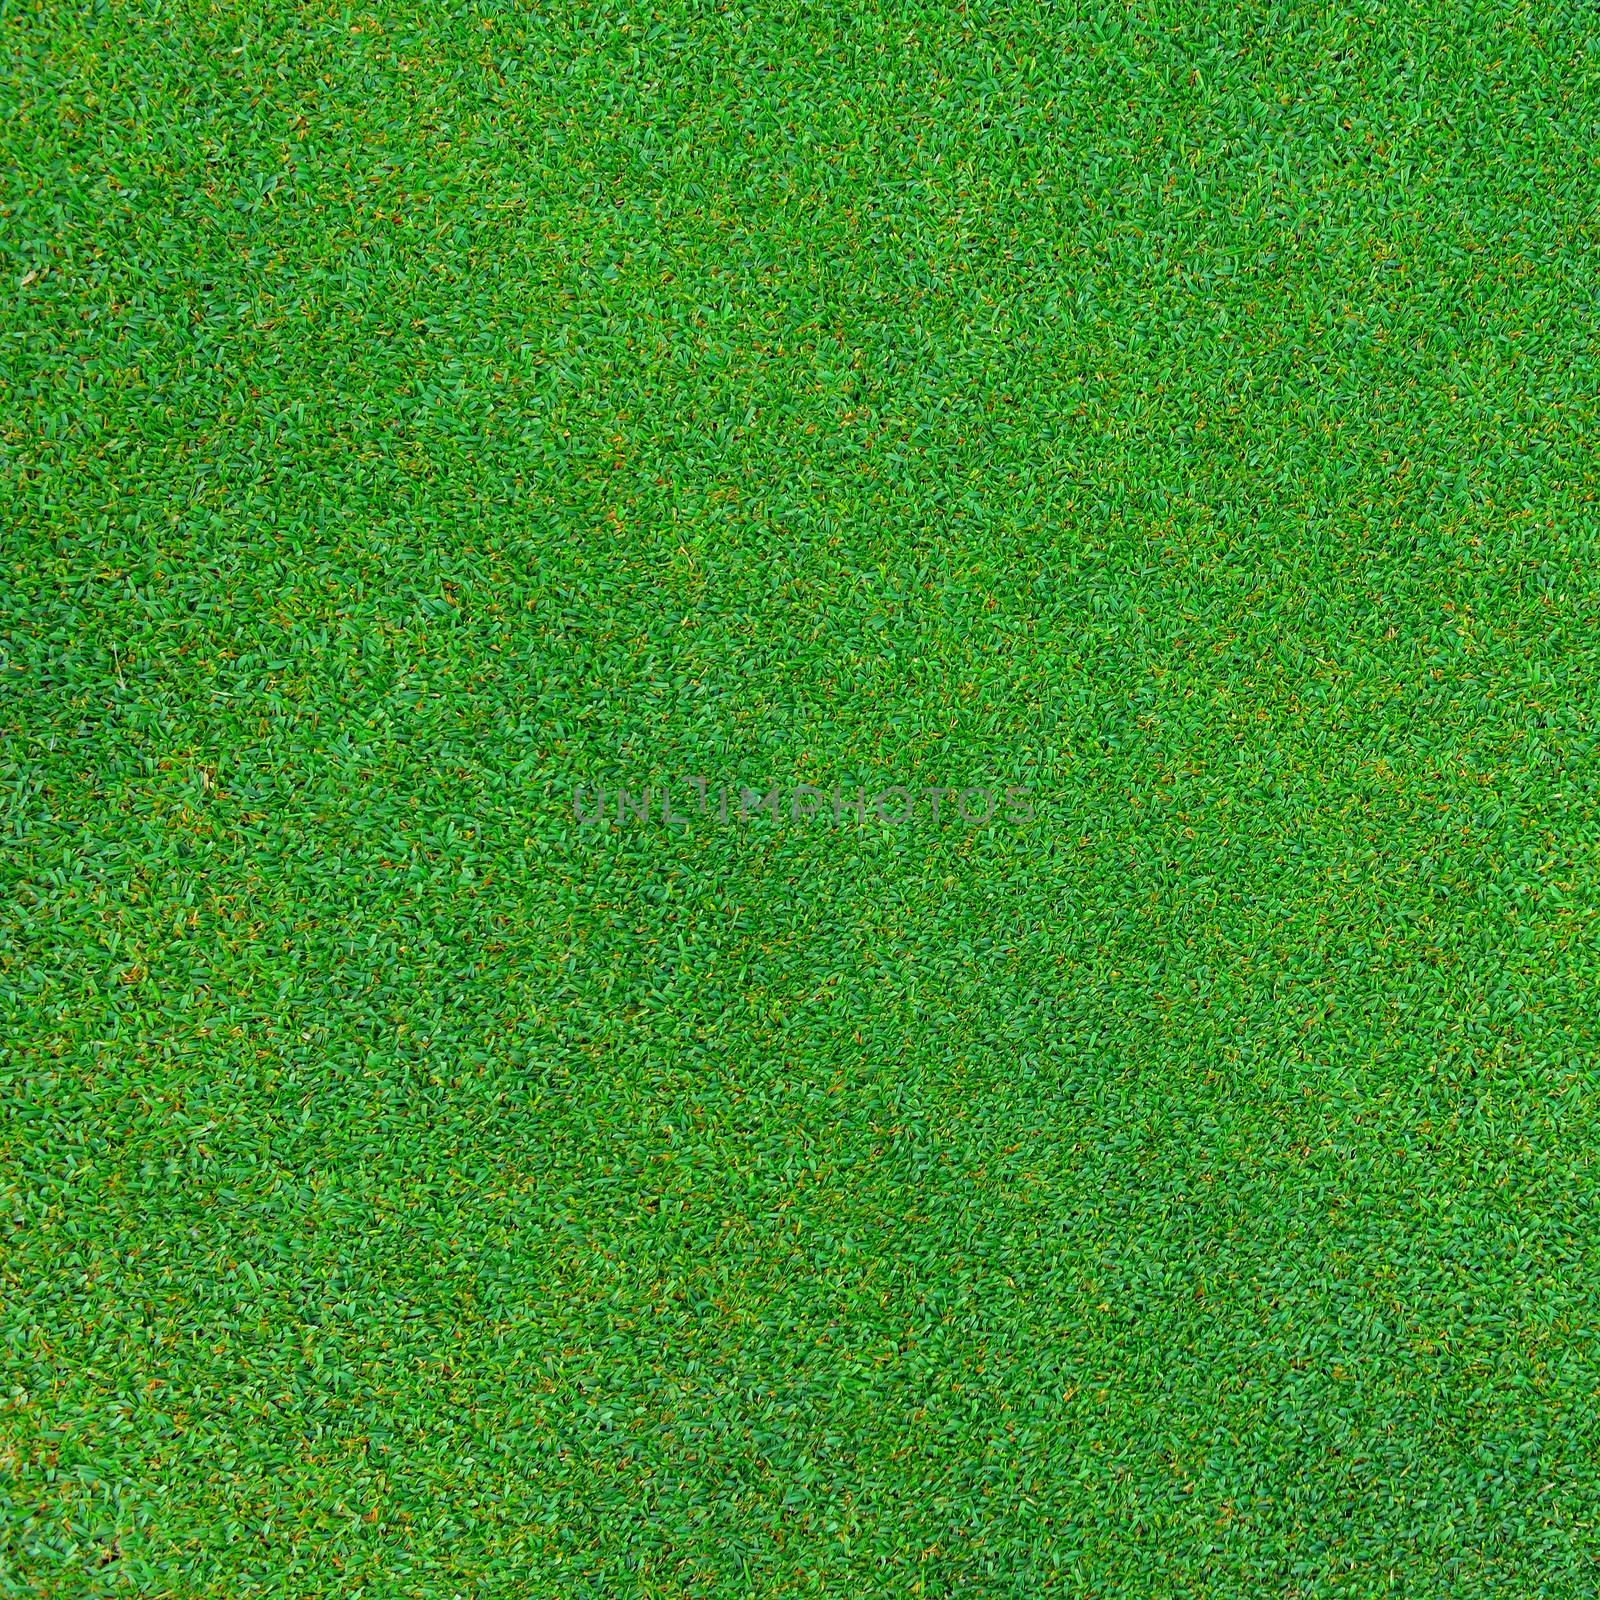 green grass texture for background by sommai